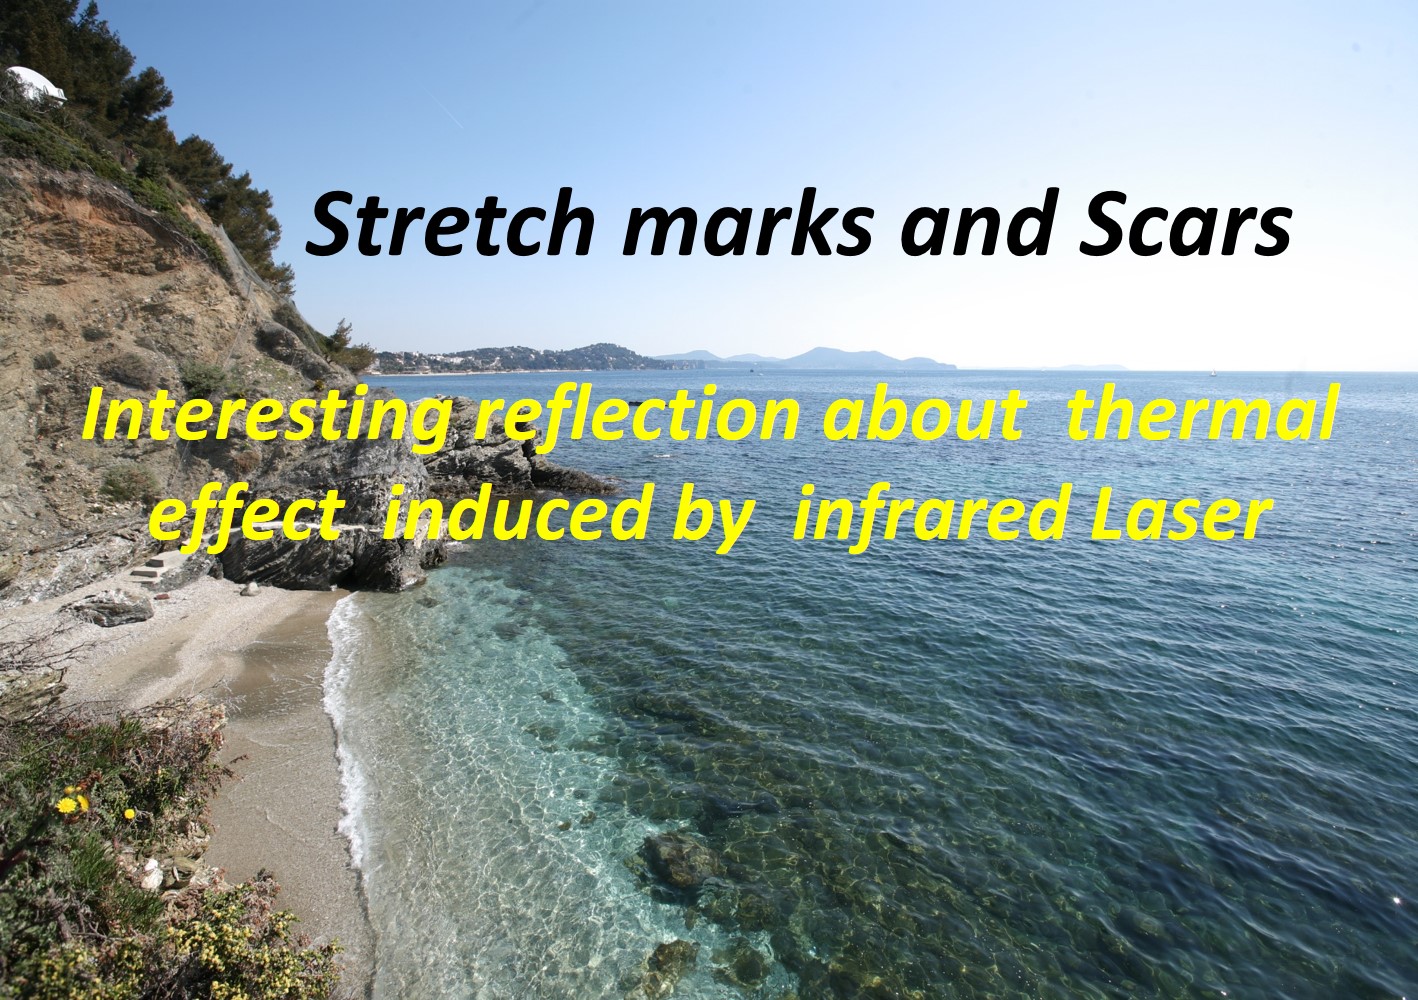 35th National Congress of Aesthetic Medicine and Dermatological Surgery Paris, September 12 & 13, 2014 - Stretch marks and Scars - Suzanne HAUSDORFER MD